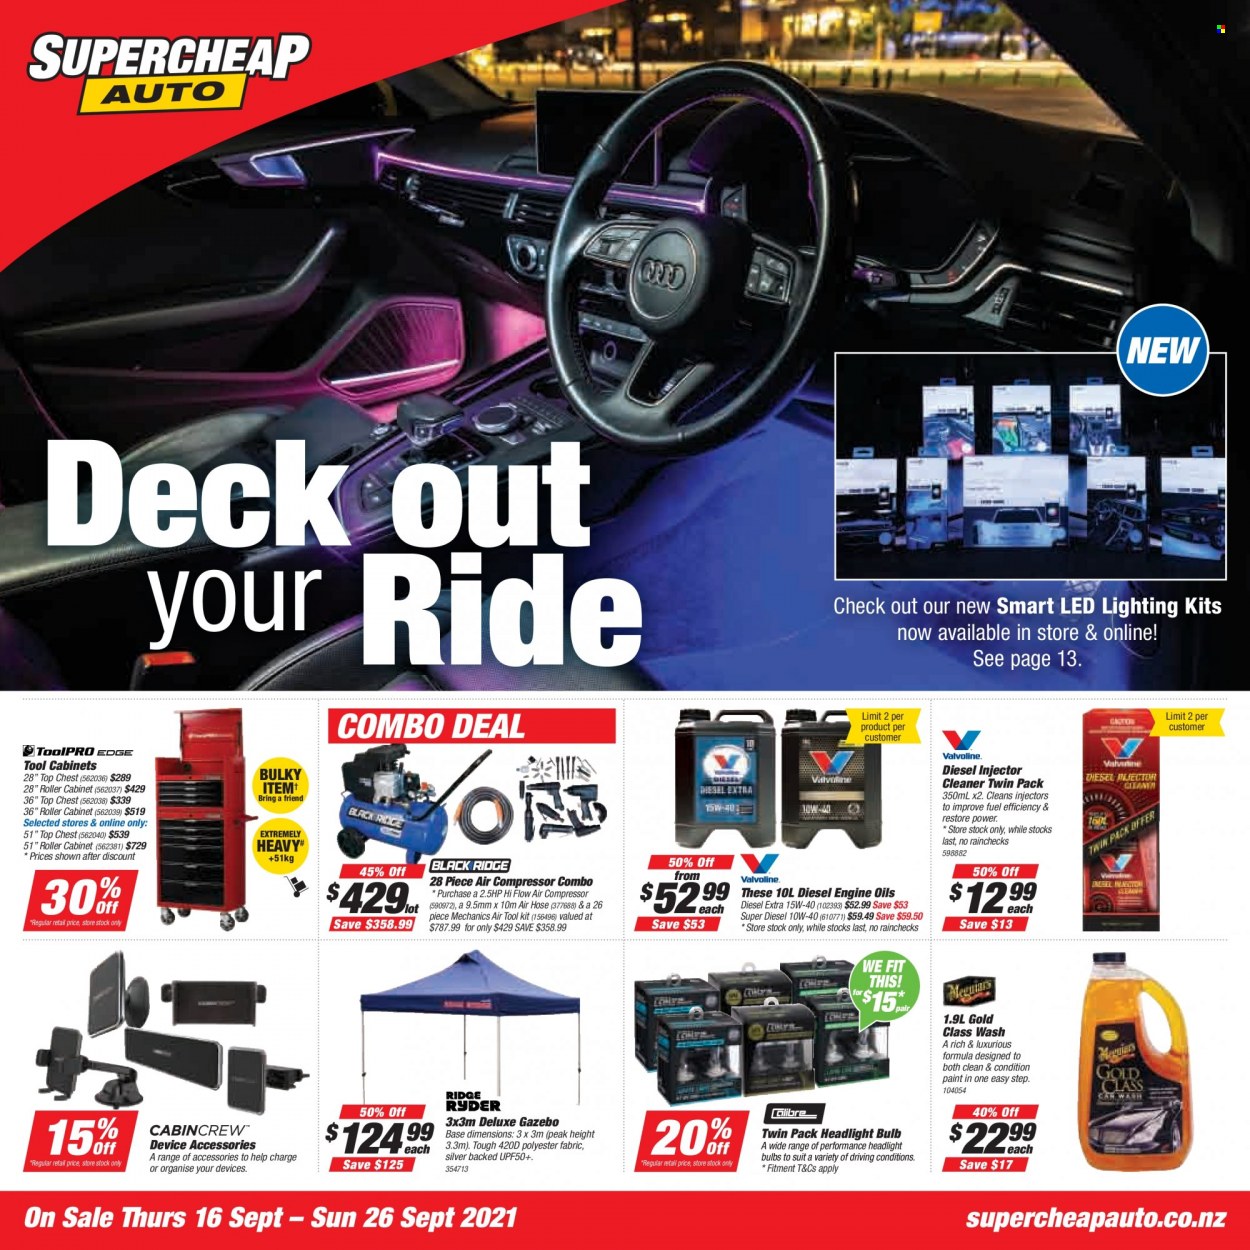 thumbnail - SuperCheap Auto mailer - 16.09.2021 - 26.09.2021 - Sales products - tool set, air compressor, cabinet, air hose, tool cabinets, injector cleaner, cleaner. Page 1.